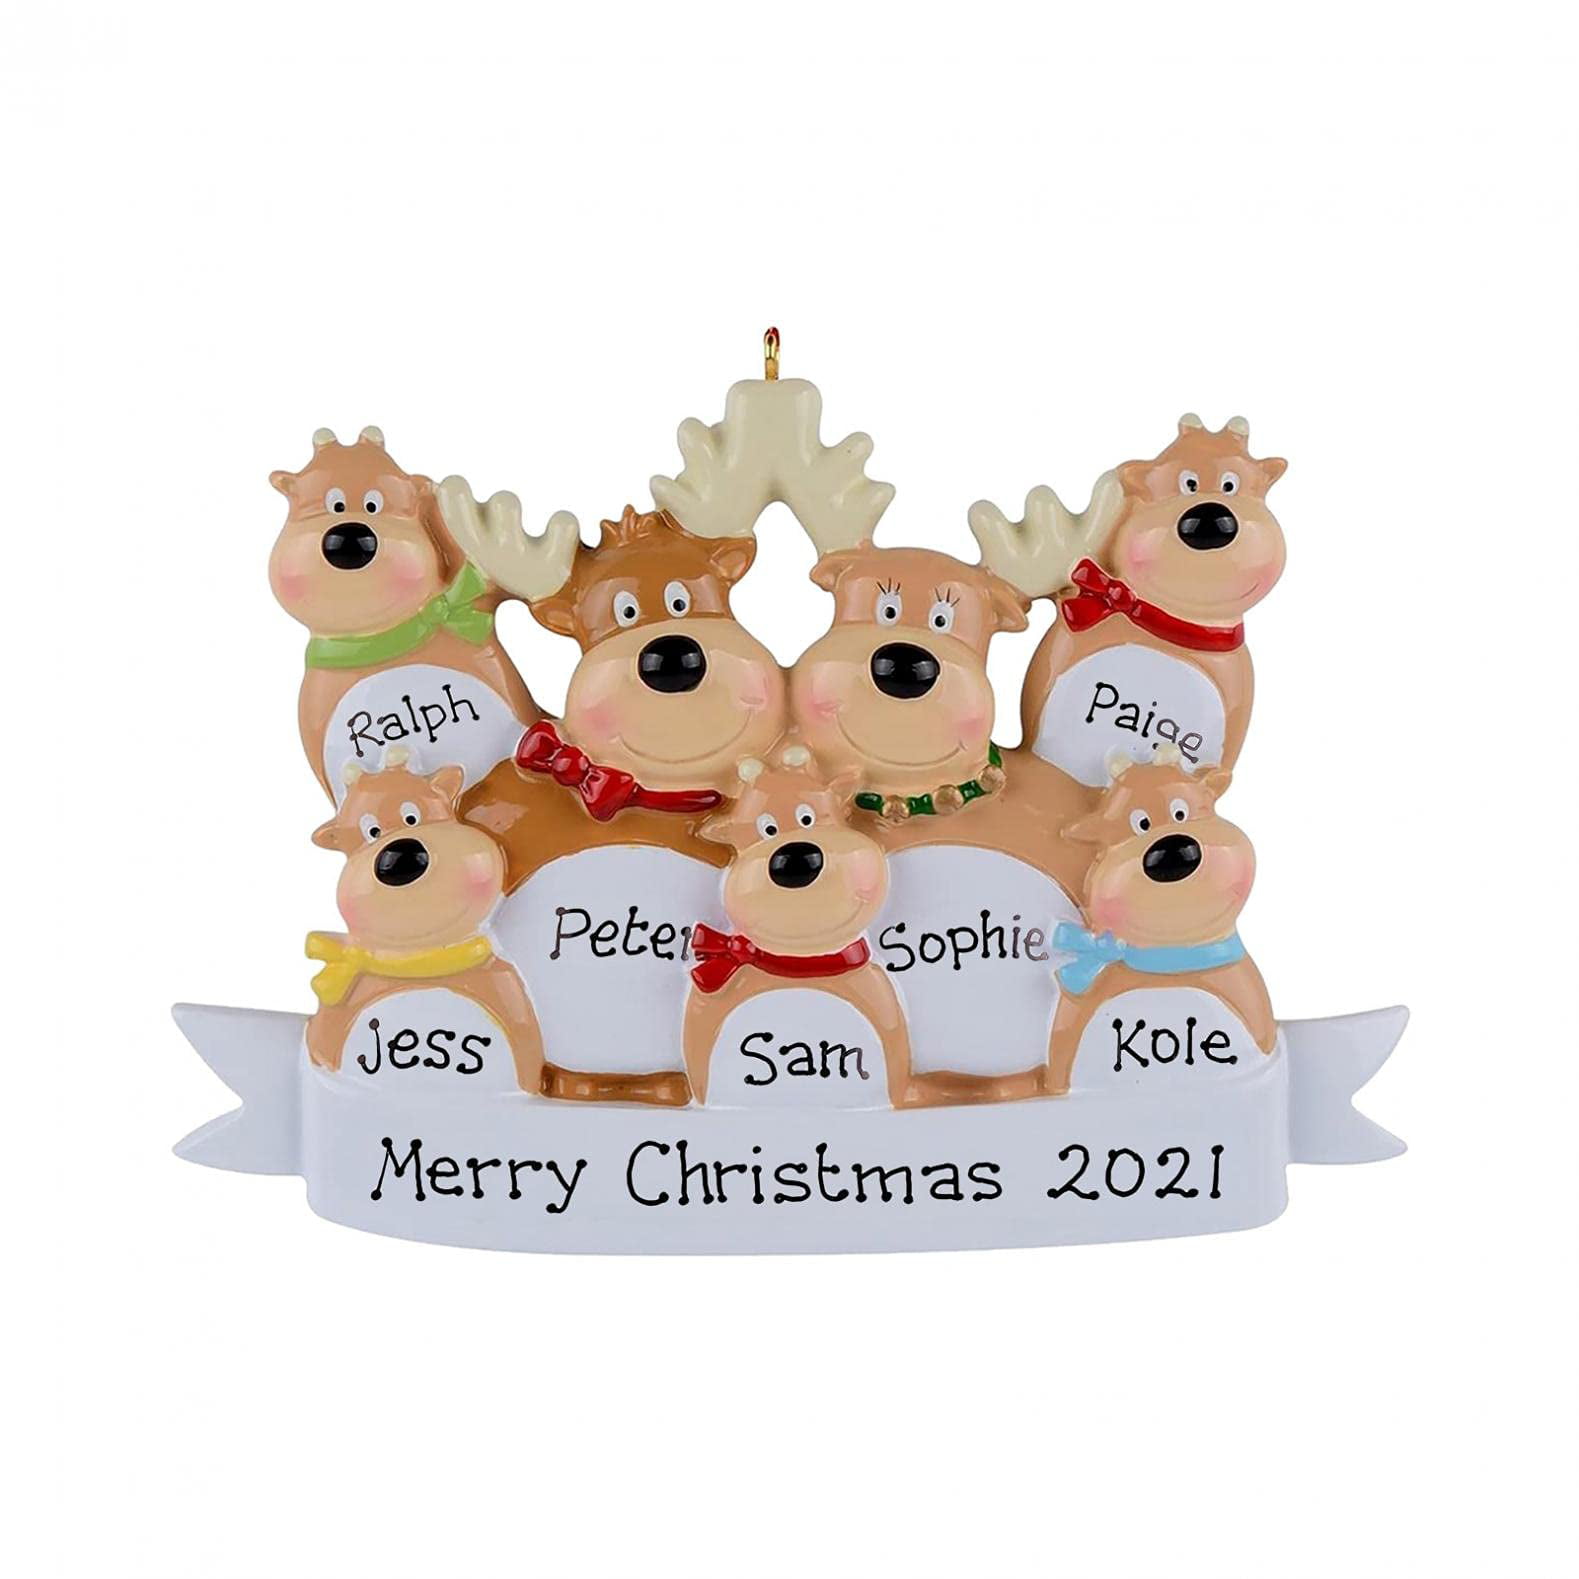 Christmas Decorations Personalized Reindeer Family Christmas Tree Ornament Funny Cute Deer Holiday Winter Gift Year Durable 2021 Family Ornament 